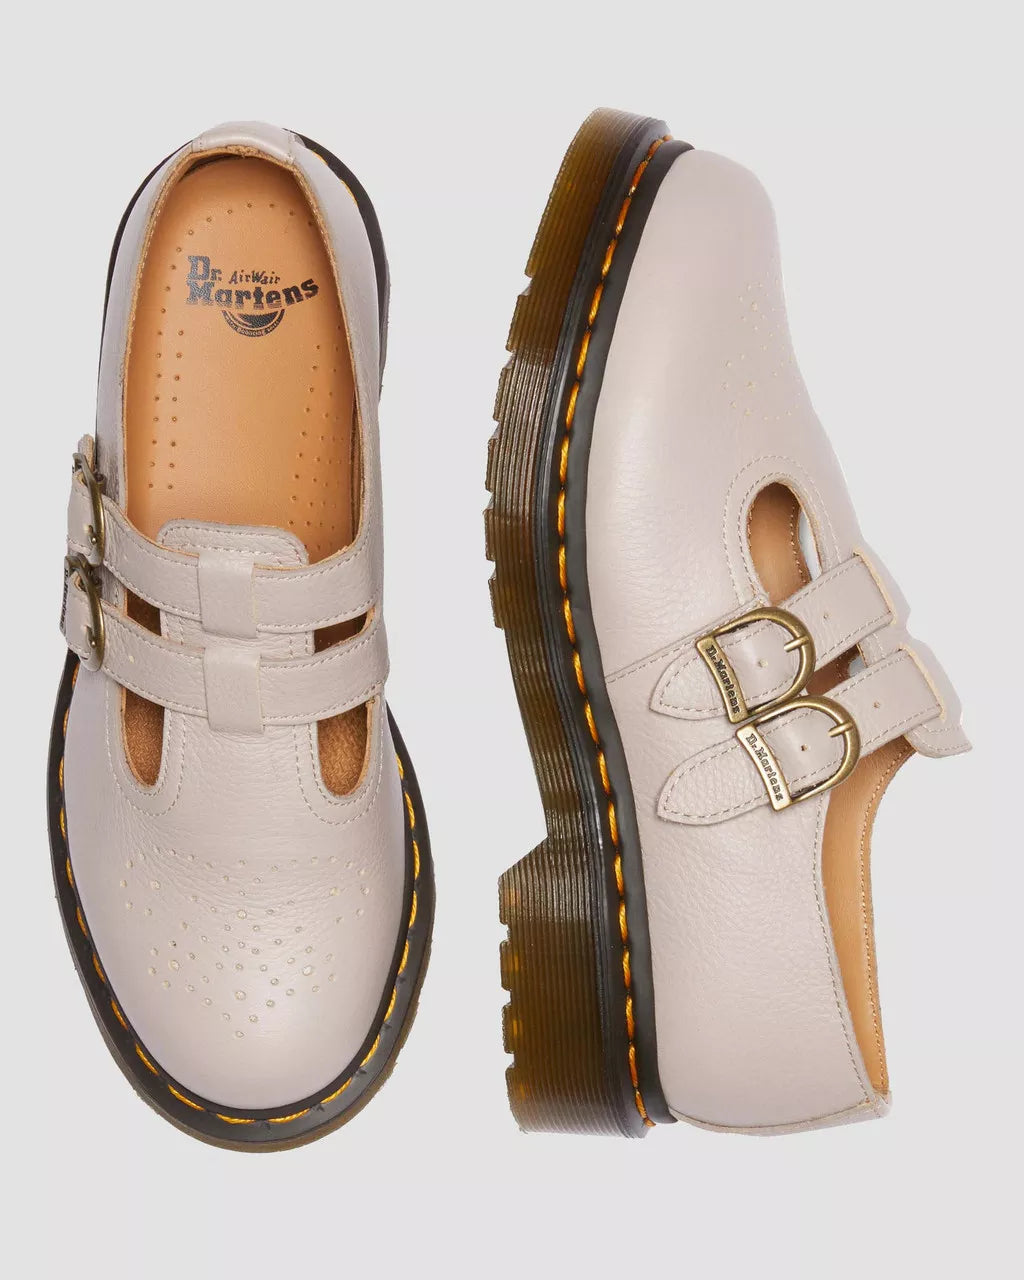 Dr. Martens | 8065 Virginia Leather Mary Jane | Vintage Taupe - Poppy and Stella